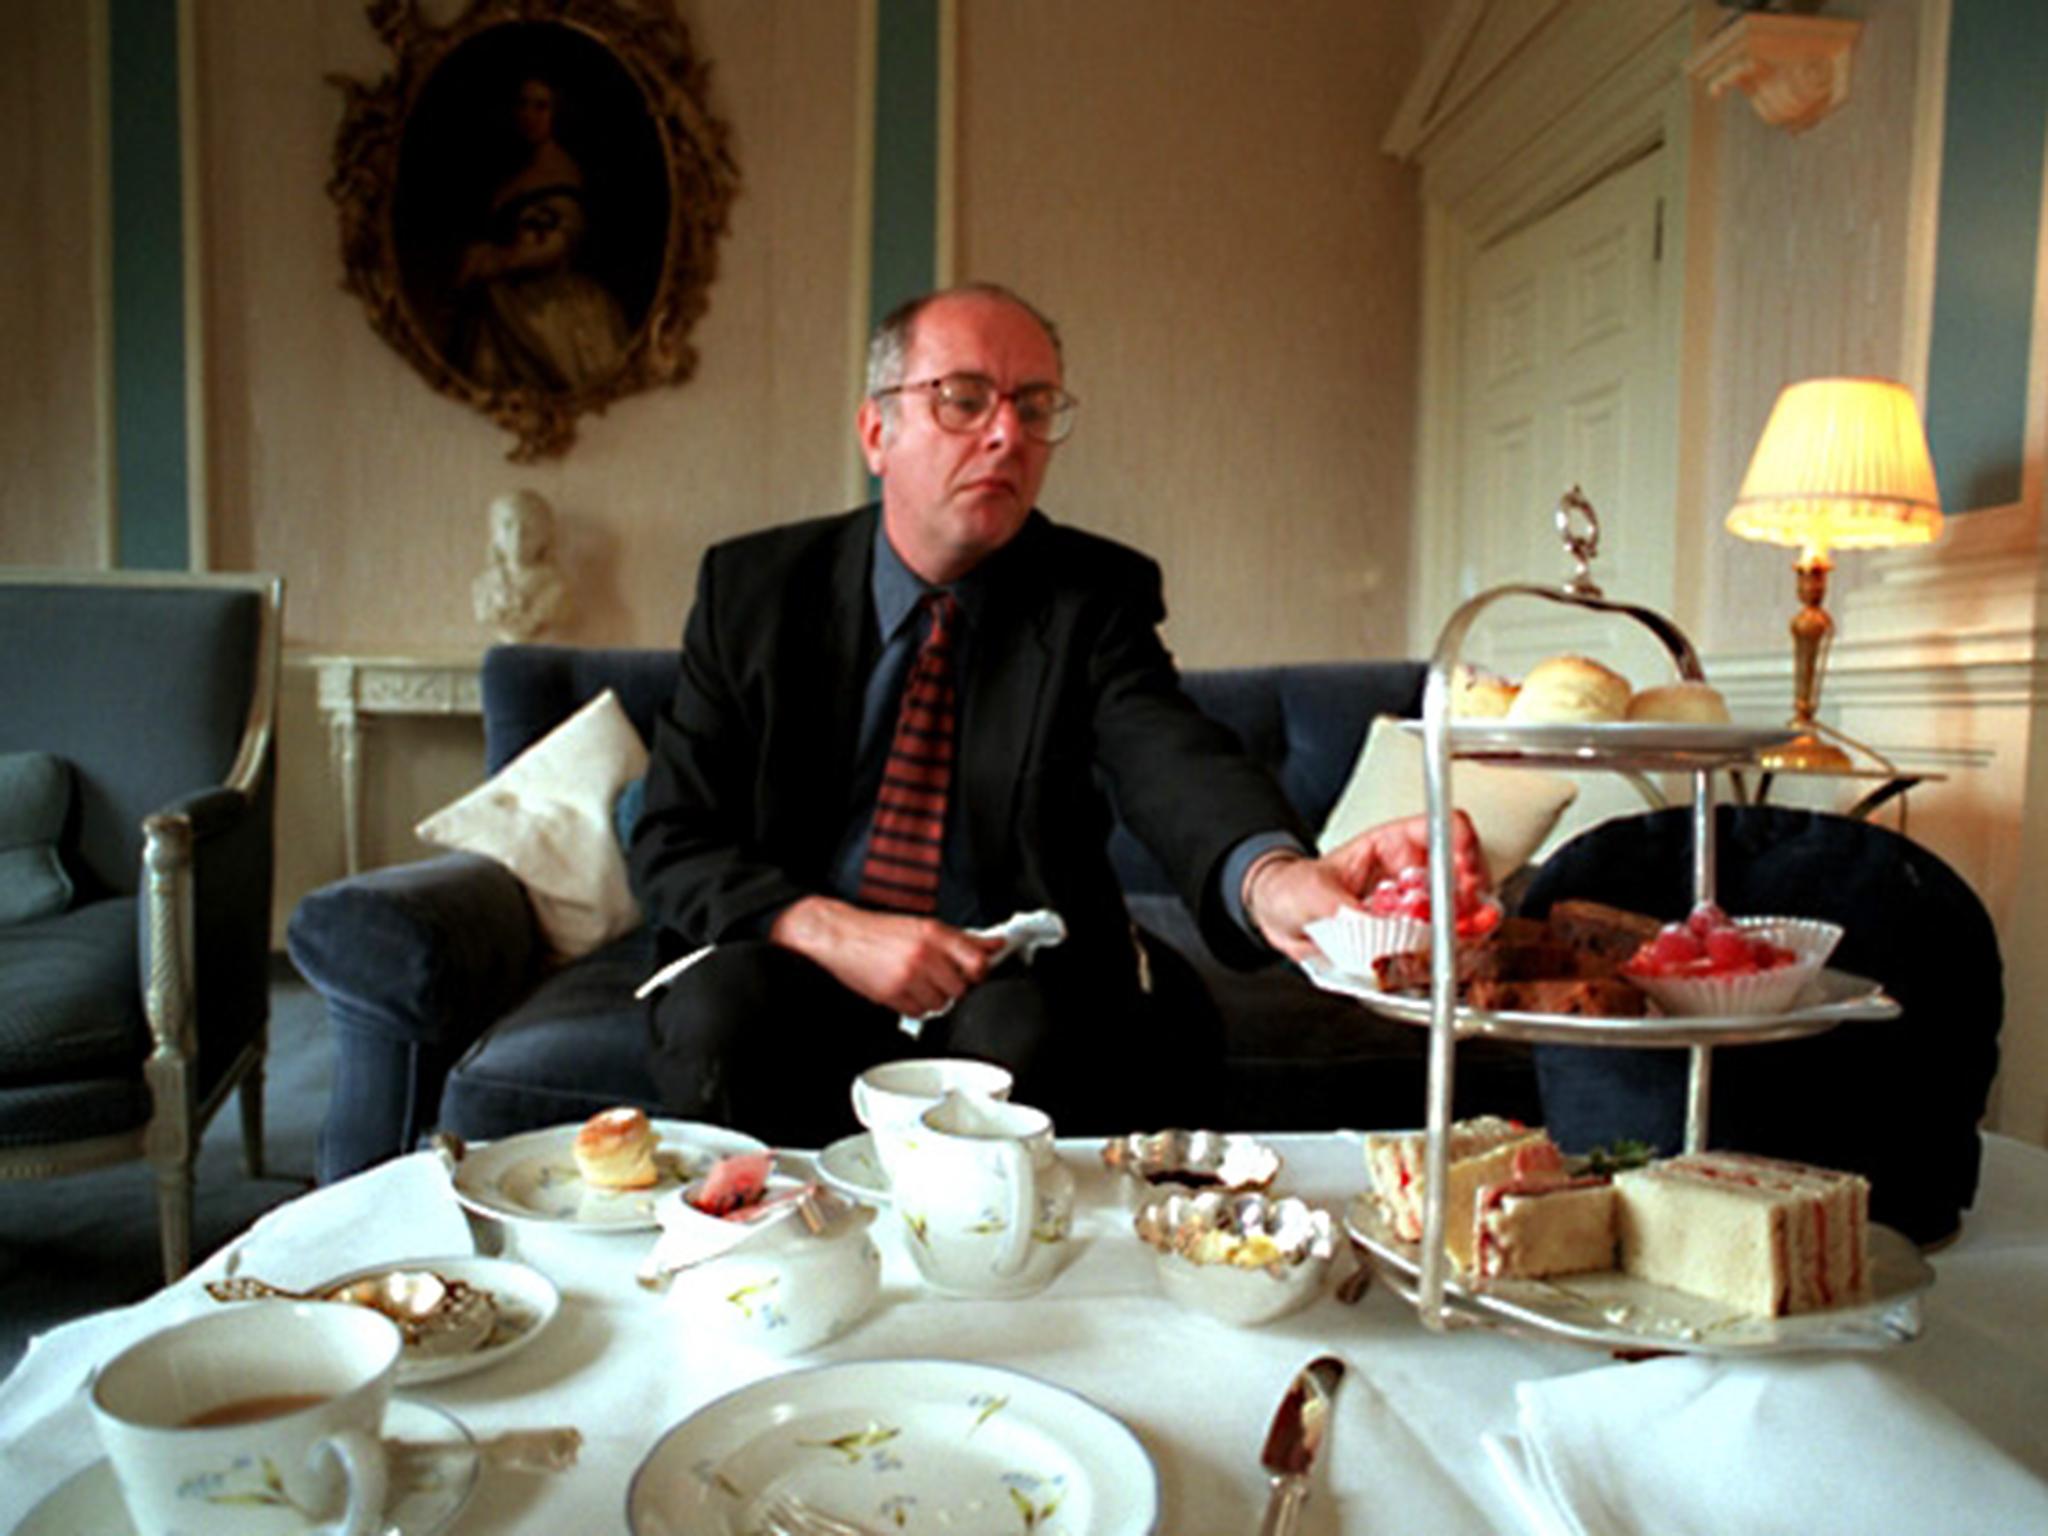 David Lister, who once filled the role of Independent diarist, settles down to high tea at Cliveden in May 1999